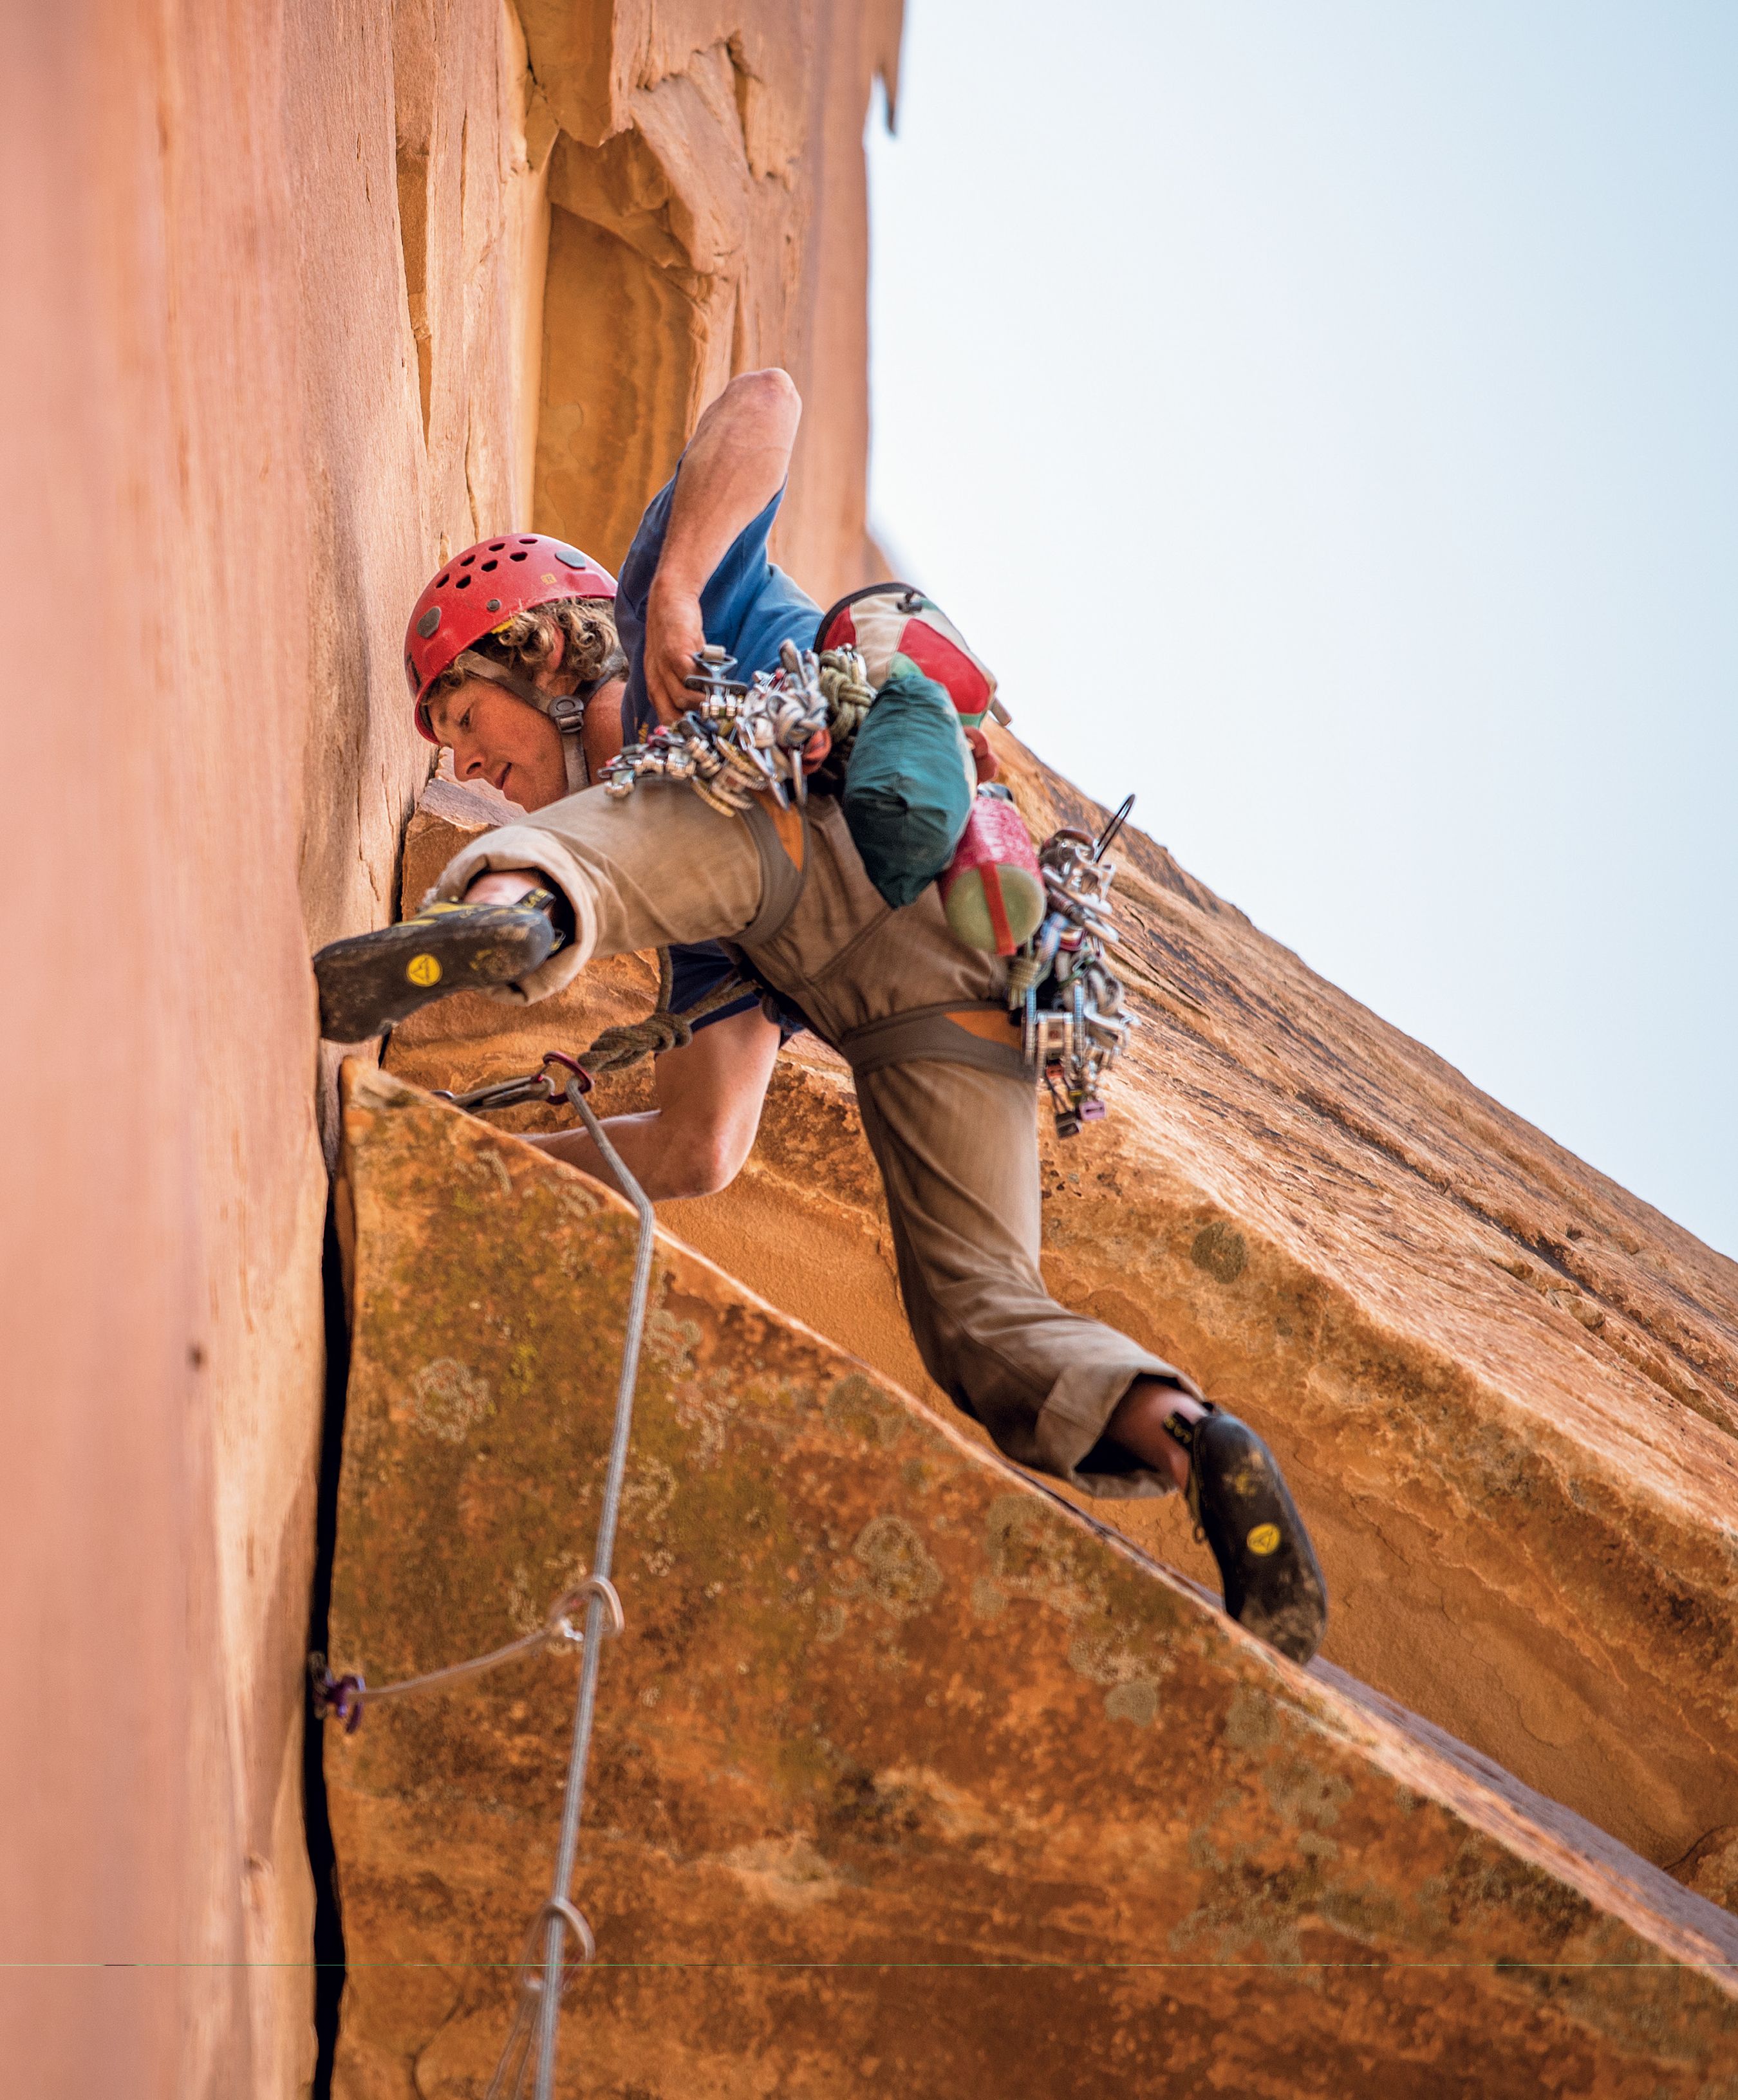 Harrison on the fourth pitch of Zoroaster Temple's Southeast Face. In the 2016 American Alpine Journal, Harrison reported that the free ascent of the route had been a 'serious' project of mine ever since Mathieu Brown and I established the route in 2012. Harrison returned with Alwyne Butler in 2013 to attempt a free ascent. During that trip, they managed to remove the aid from all except Pitch 3 of the five-pitch climb. In April 2015, the day after Harrison, author Jeff Snyder and Blake McCord completed the free ascent, they climbed to the top of Zoroaster a second time to refill the summit register's stash of whisky. [Photo] Blake McCord